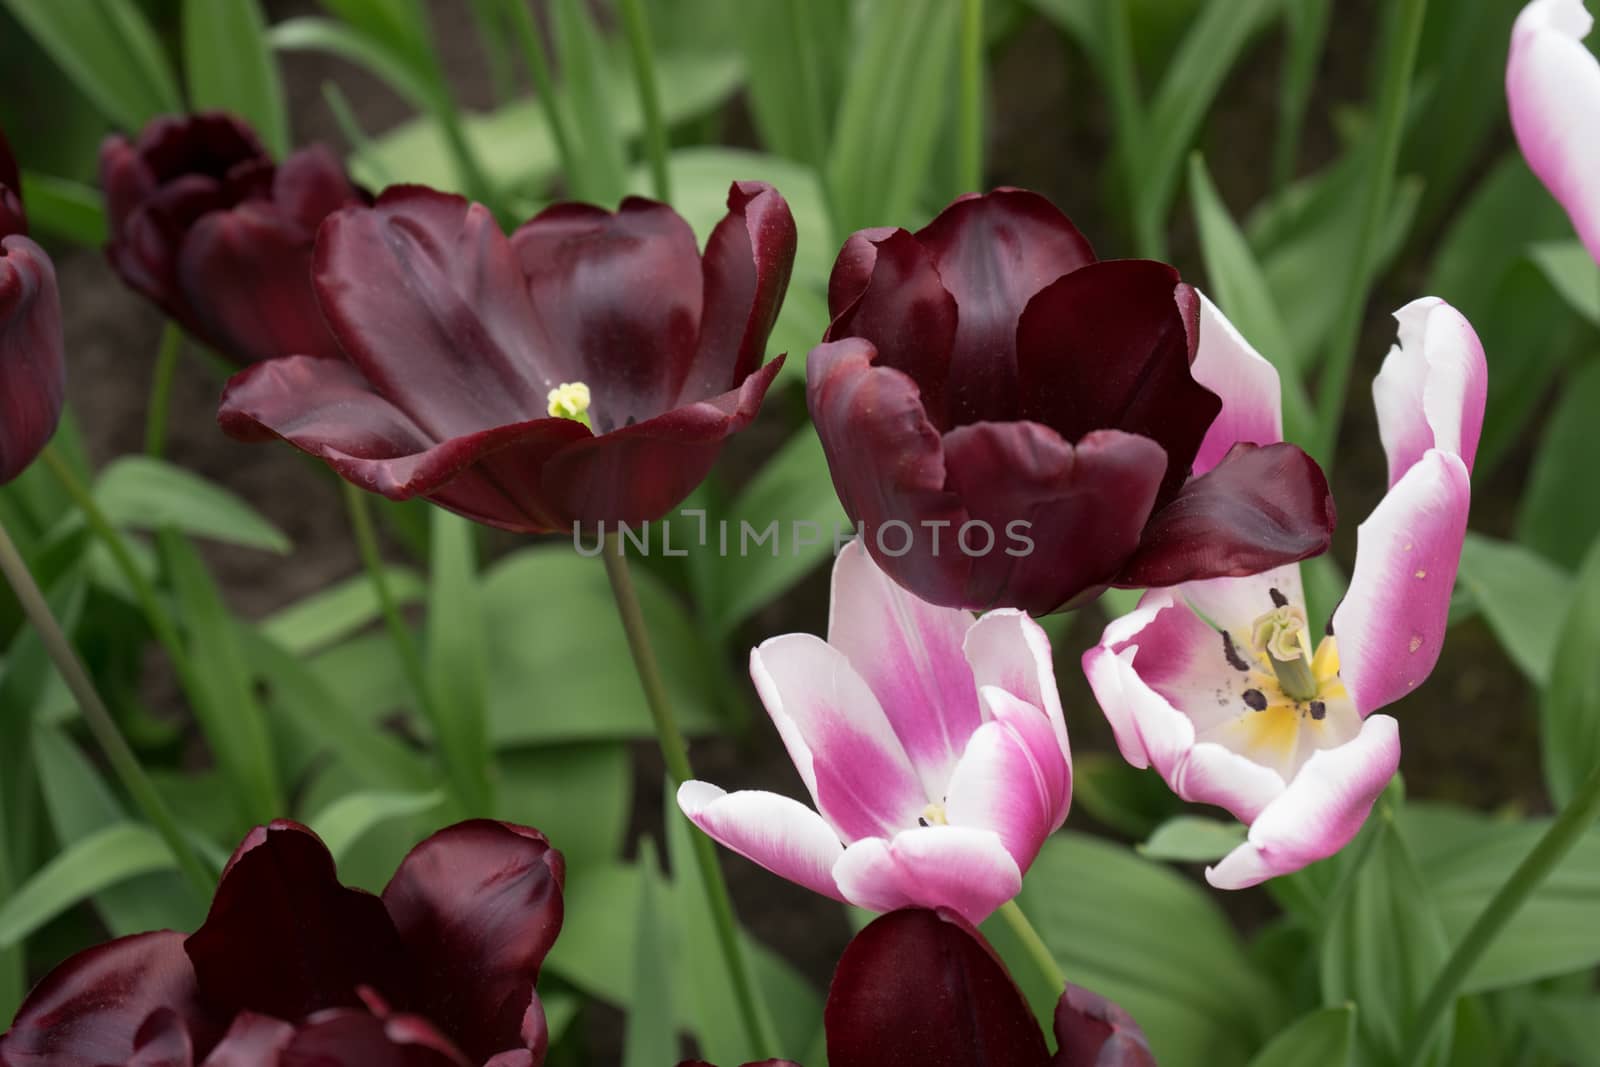 Black and pink colored tulips flowers in a garden in Lisse, Neth by ramana16